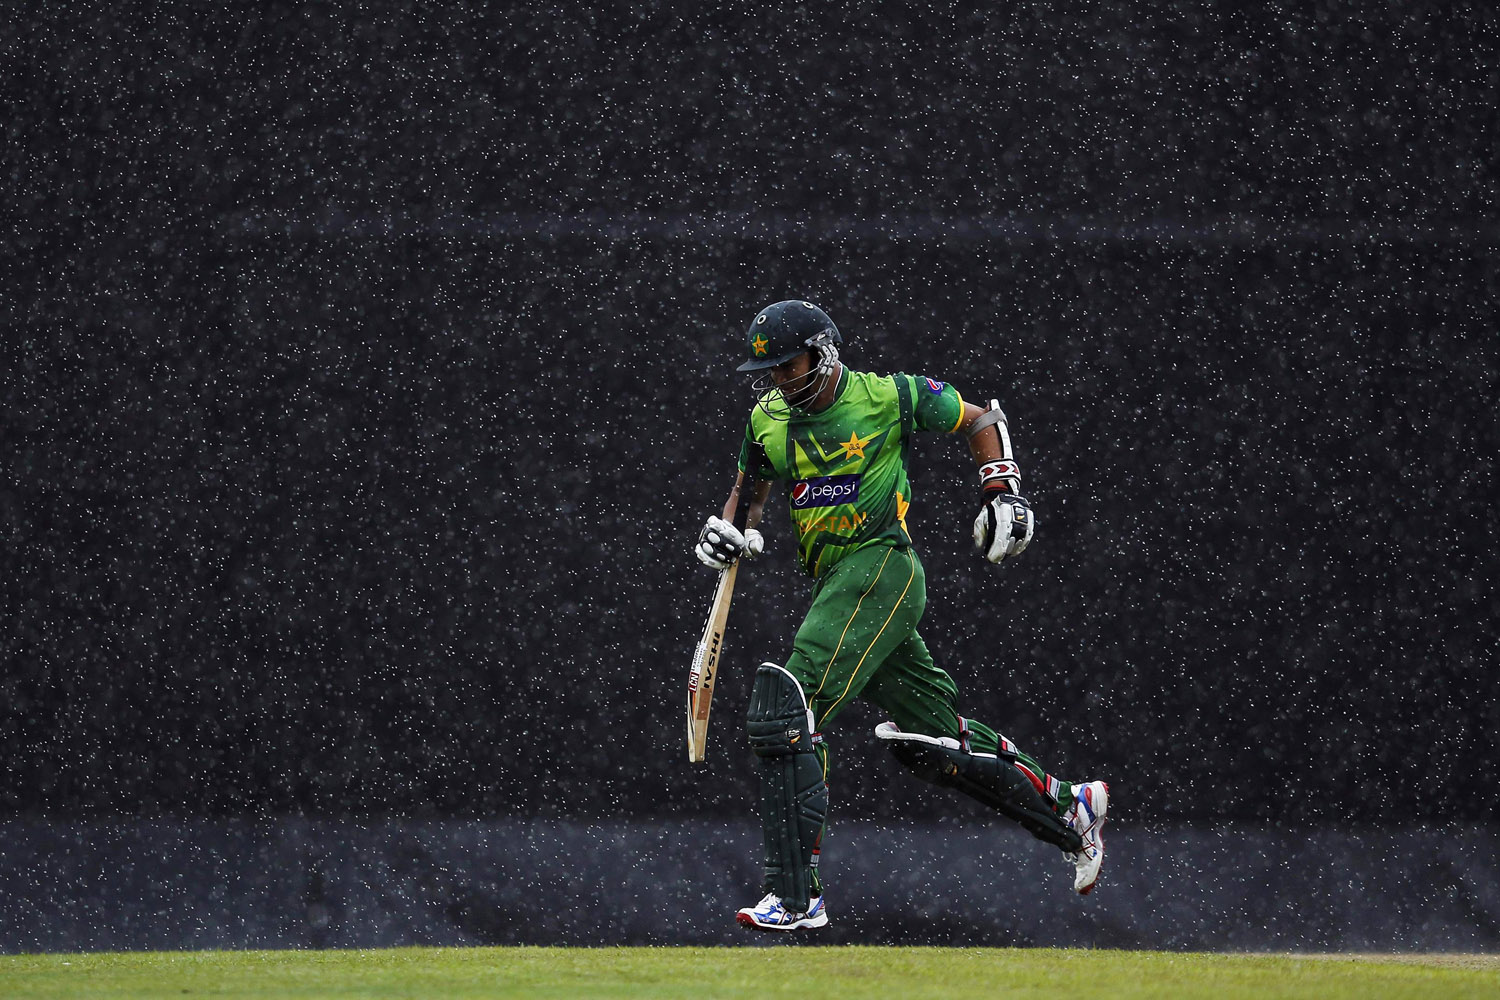 June 13, 2012. Pakistan's Azhar Ali runs back to pavilion as the match is stopped due the rain during their third One Day International (ODI) cricket match against Sri Lanka, in Colombo.